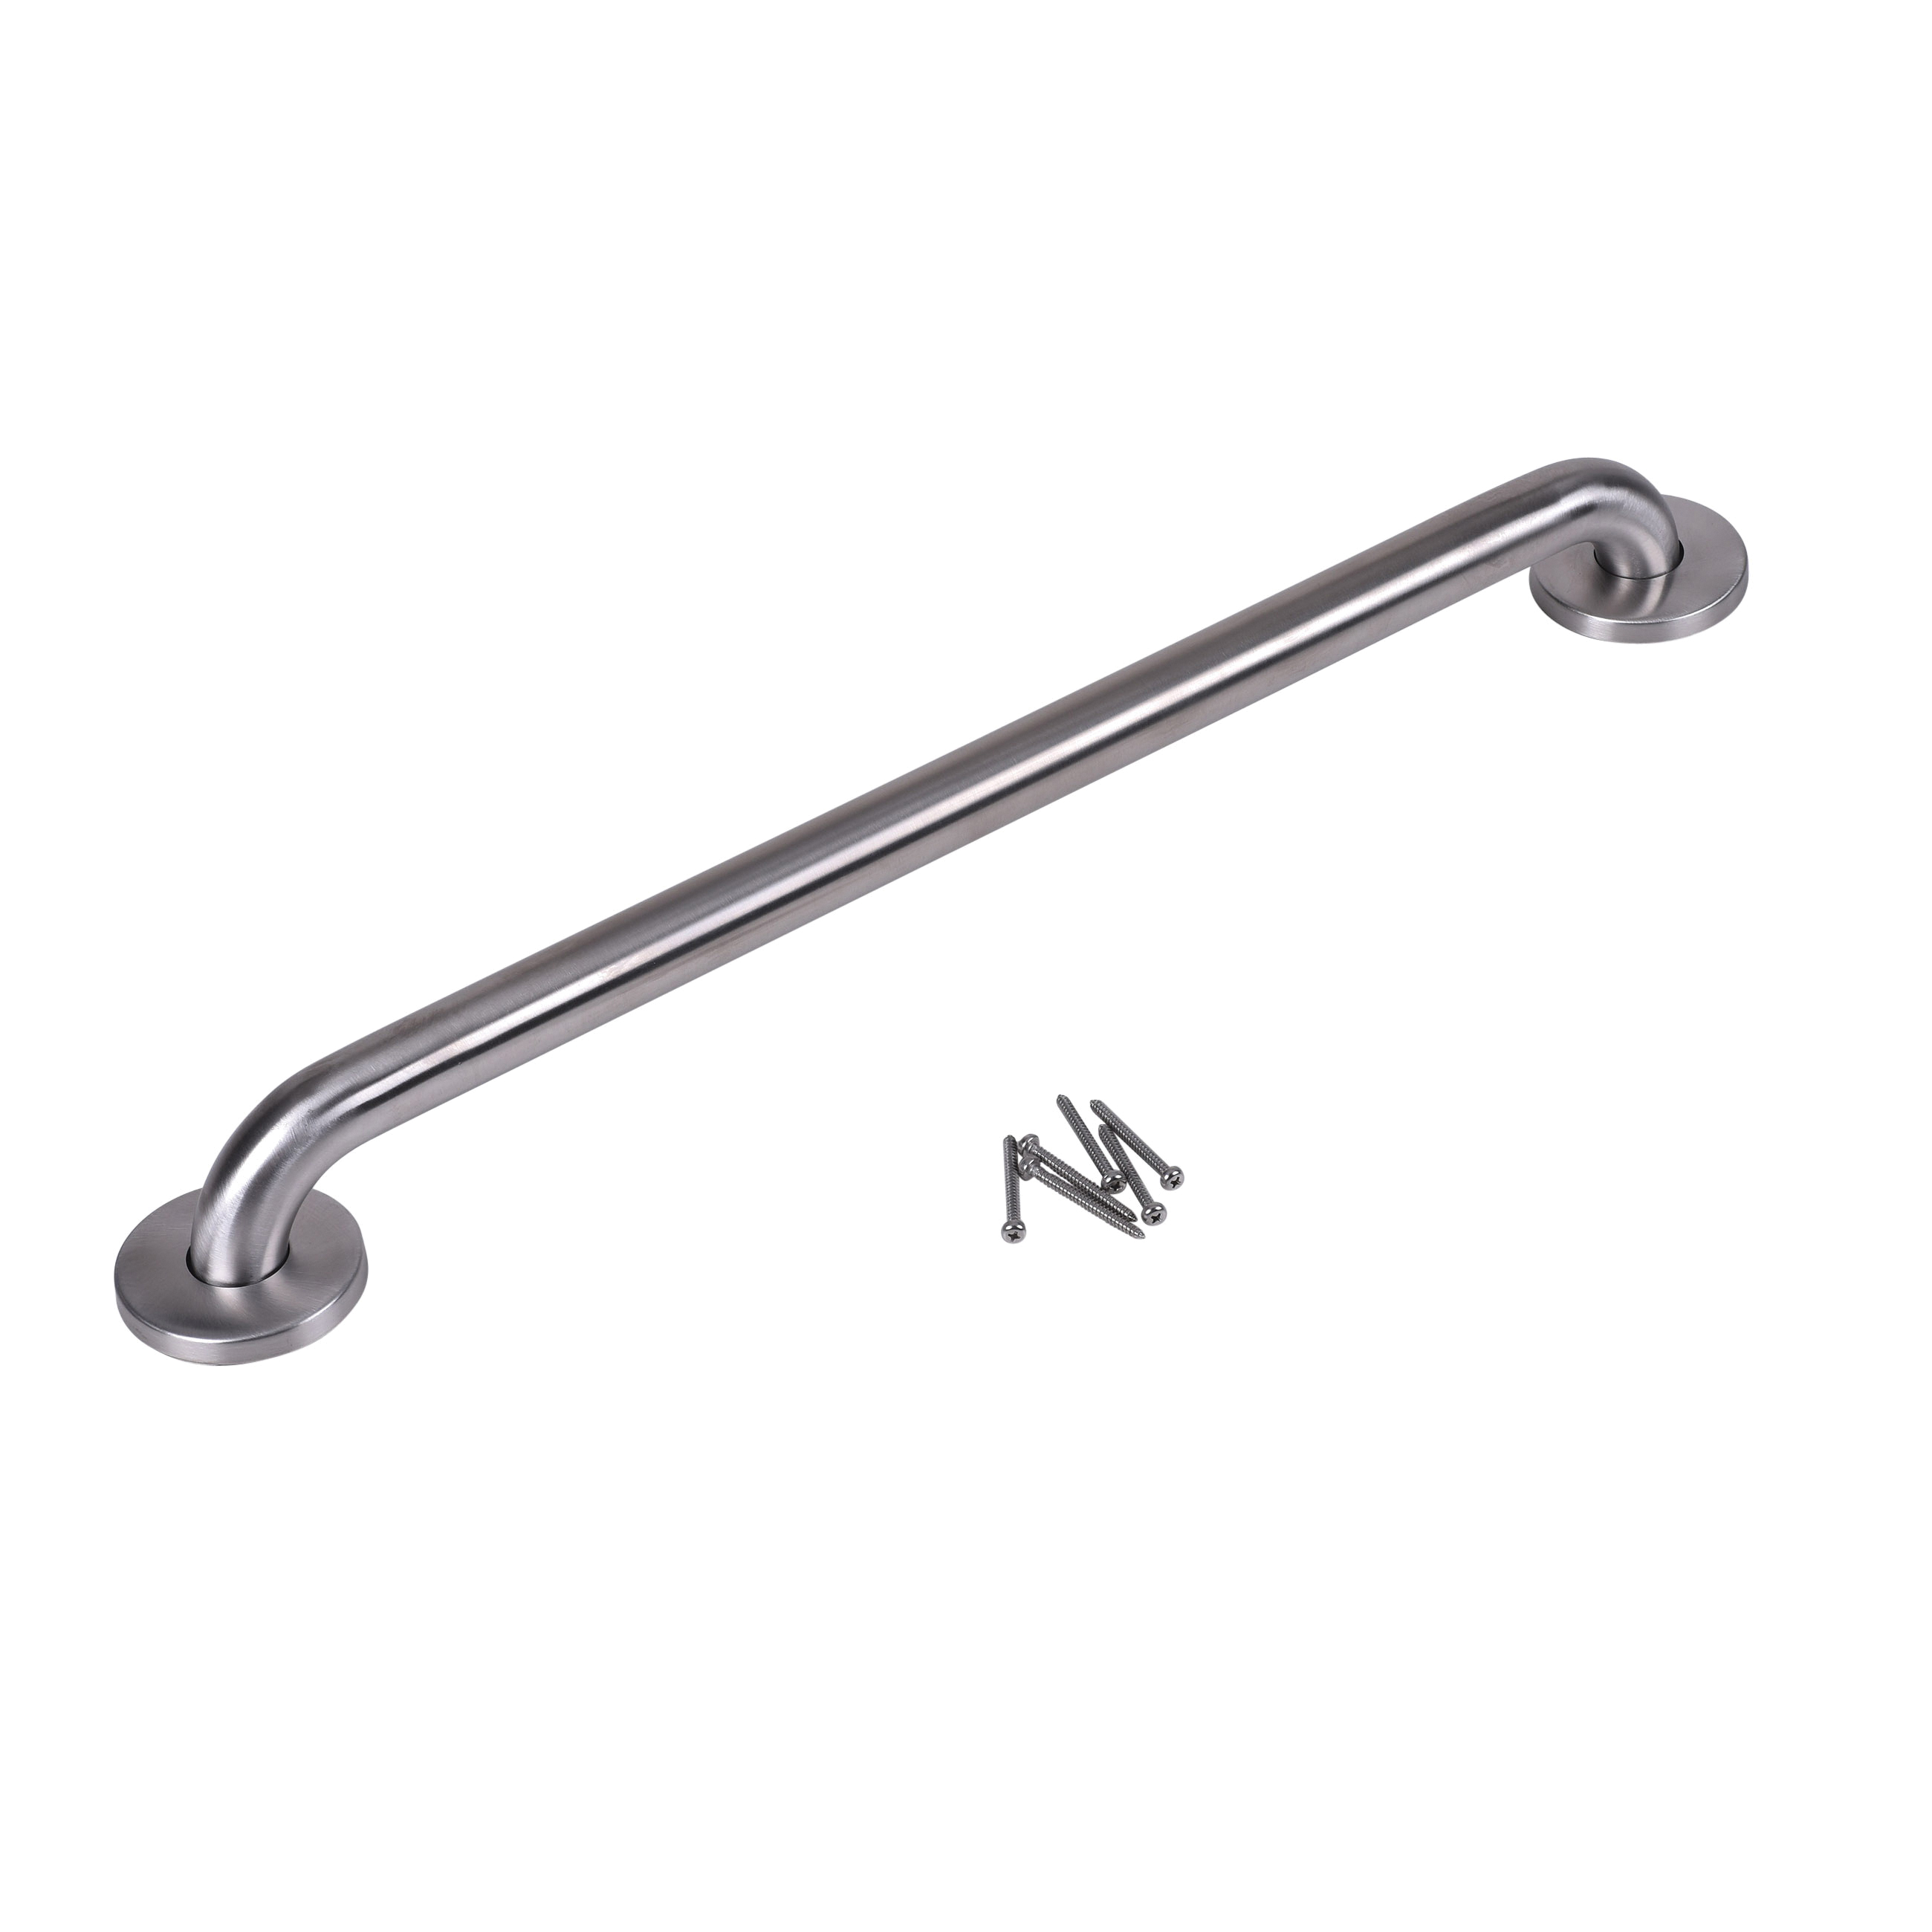 Dearborn® DB8718 Grab Bar, 1-1/4 in Dia x 18 in L, Satin, 304 Stainless Steel, Import